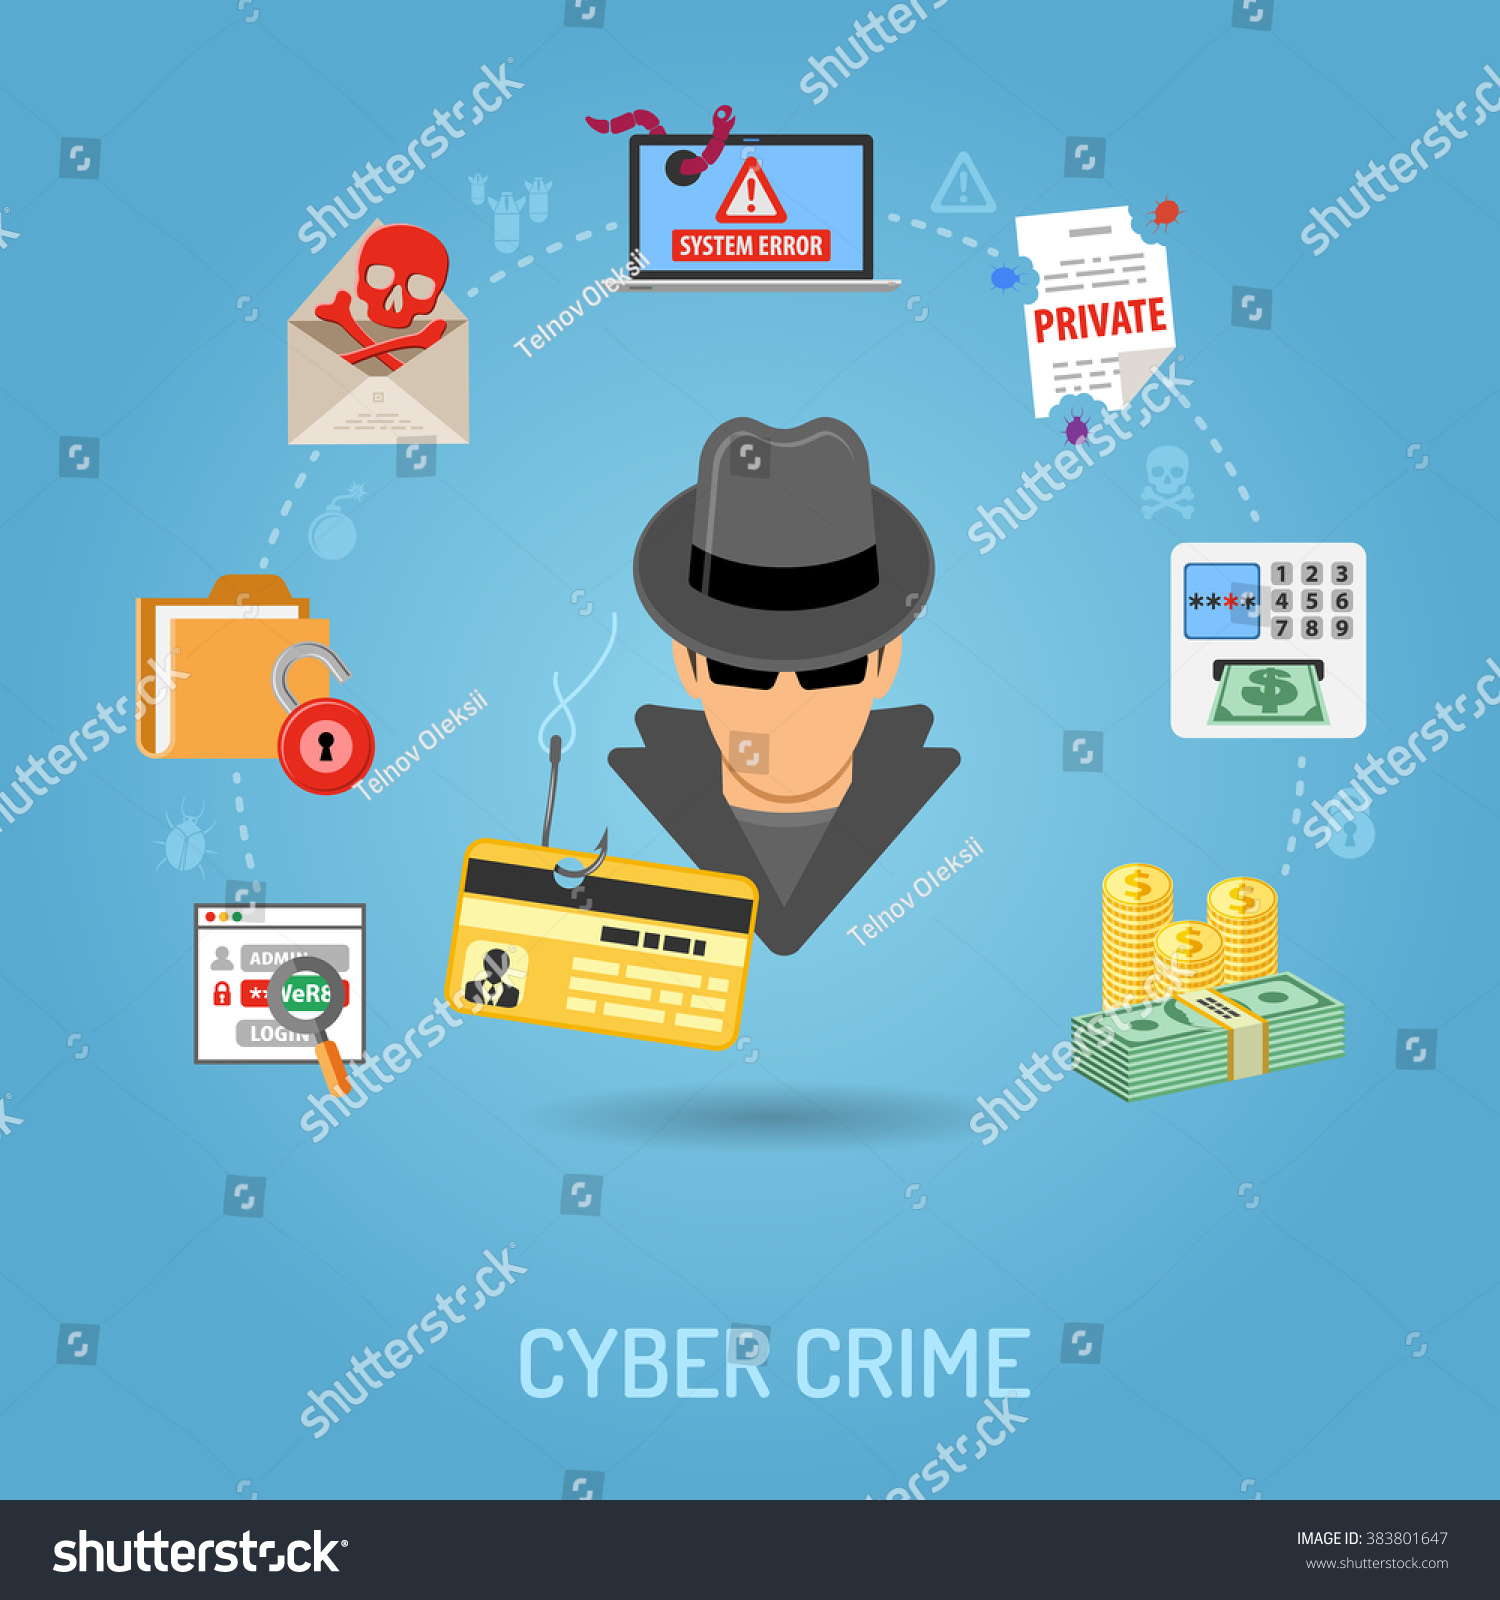 Cyber Crime Concept Flat Icons Flyer Stock Vector 383801647 - Shutterstock